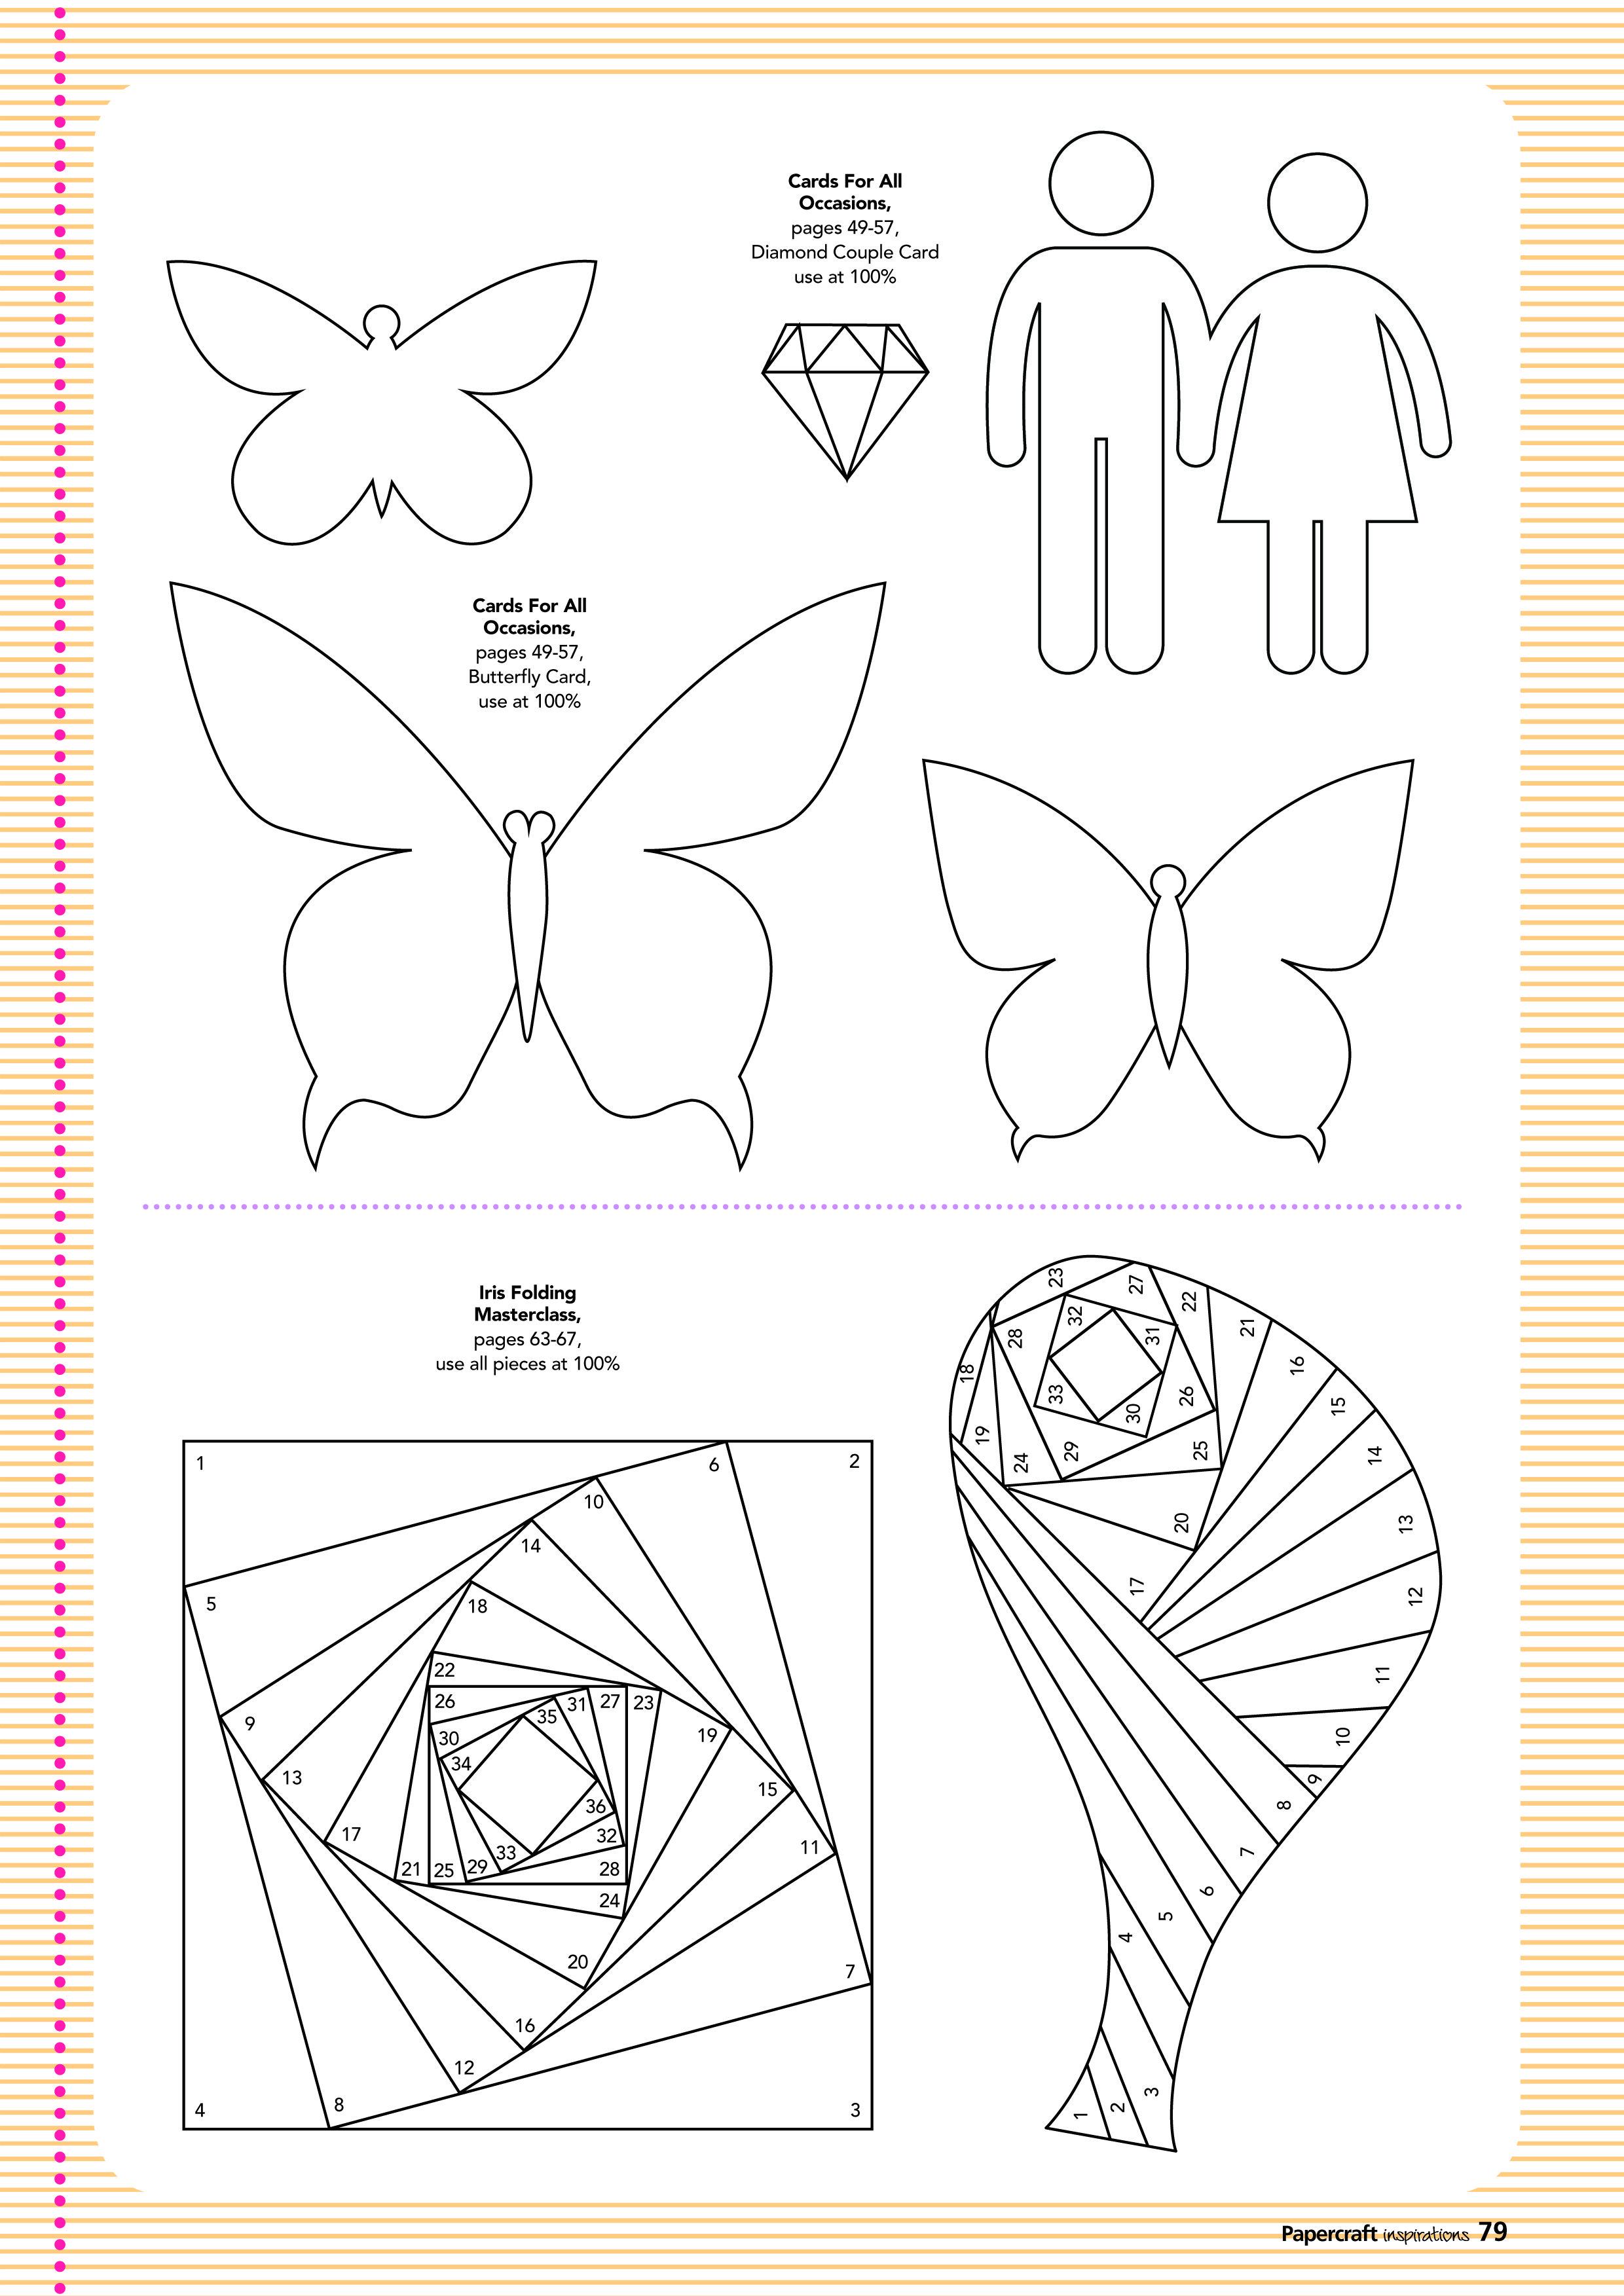 Free Card Making Templates From Papercraft Inspirations 123 Within Card Folding Templates Free